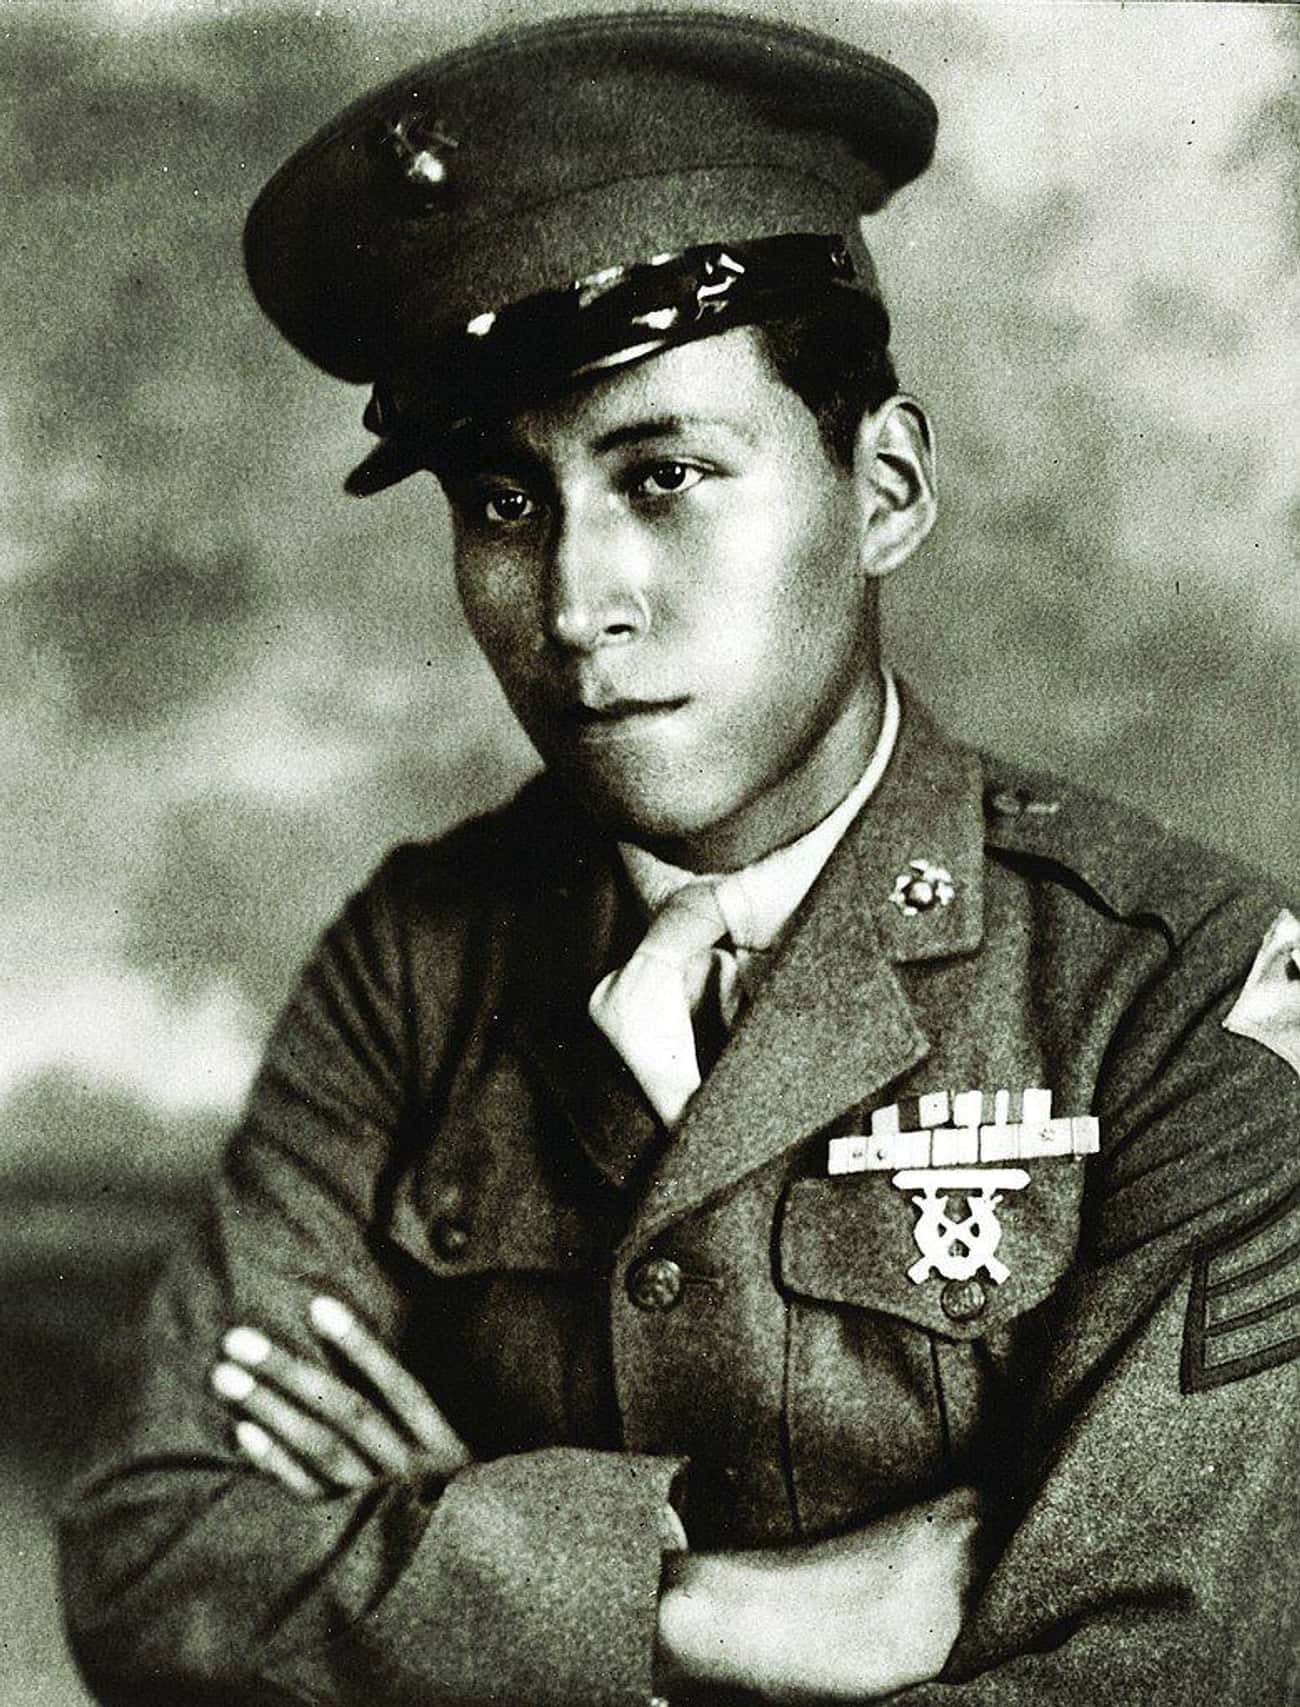 After Being Wounded, Mitchell Red Cloud Jr. Reportedly Told His Men To Tie Him To A Tree So He Could Keep Firing At The Enemy